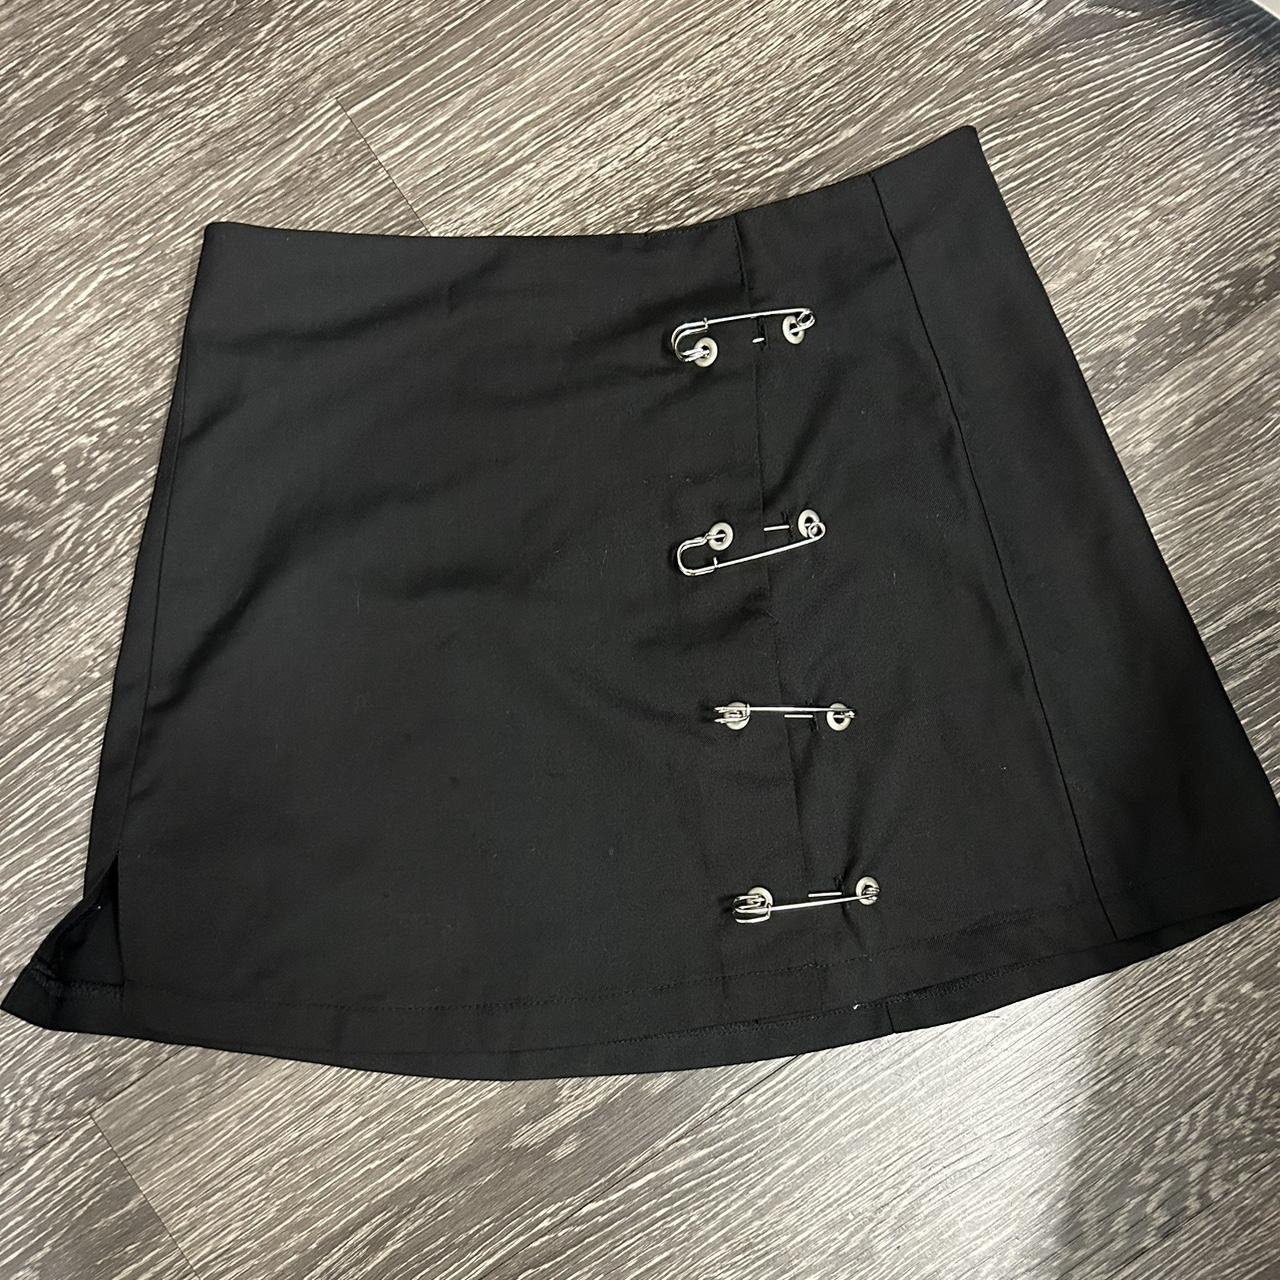 Mini skirt with side slid and oversized safety pin... - Depop